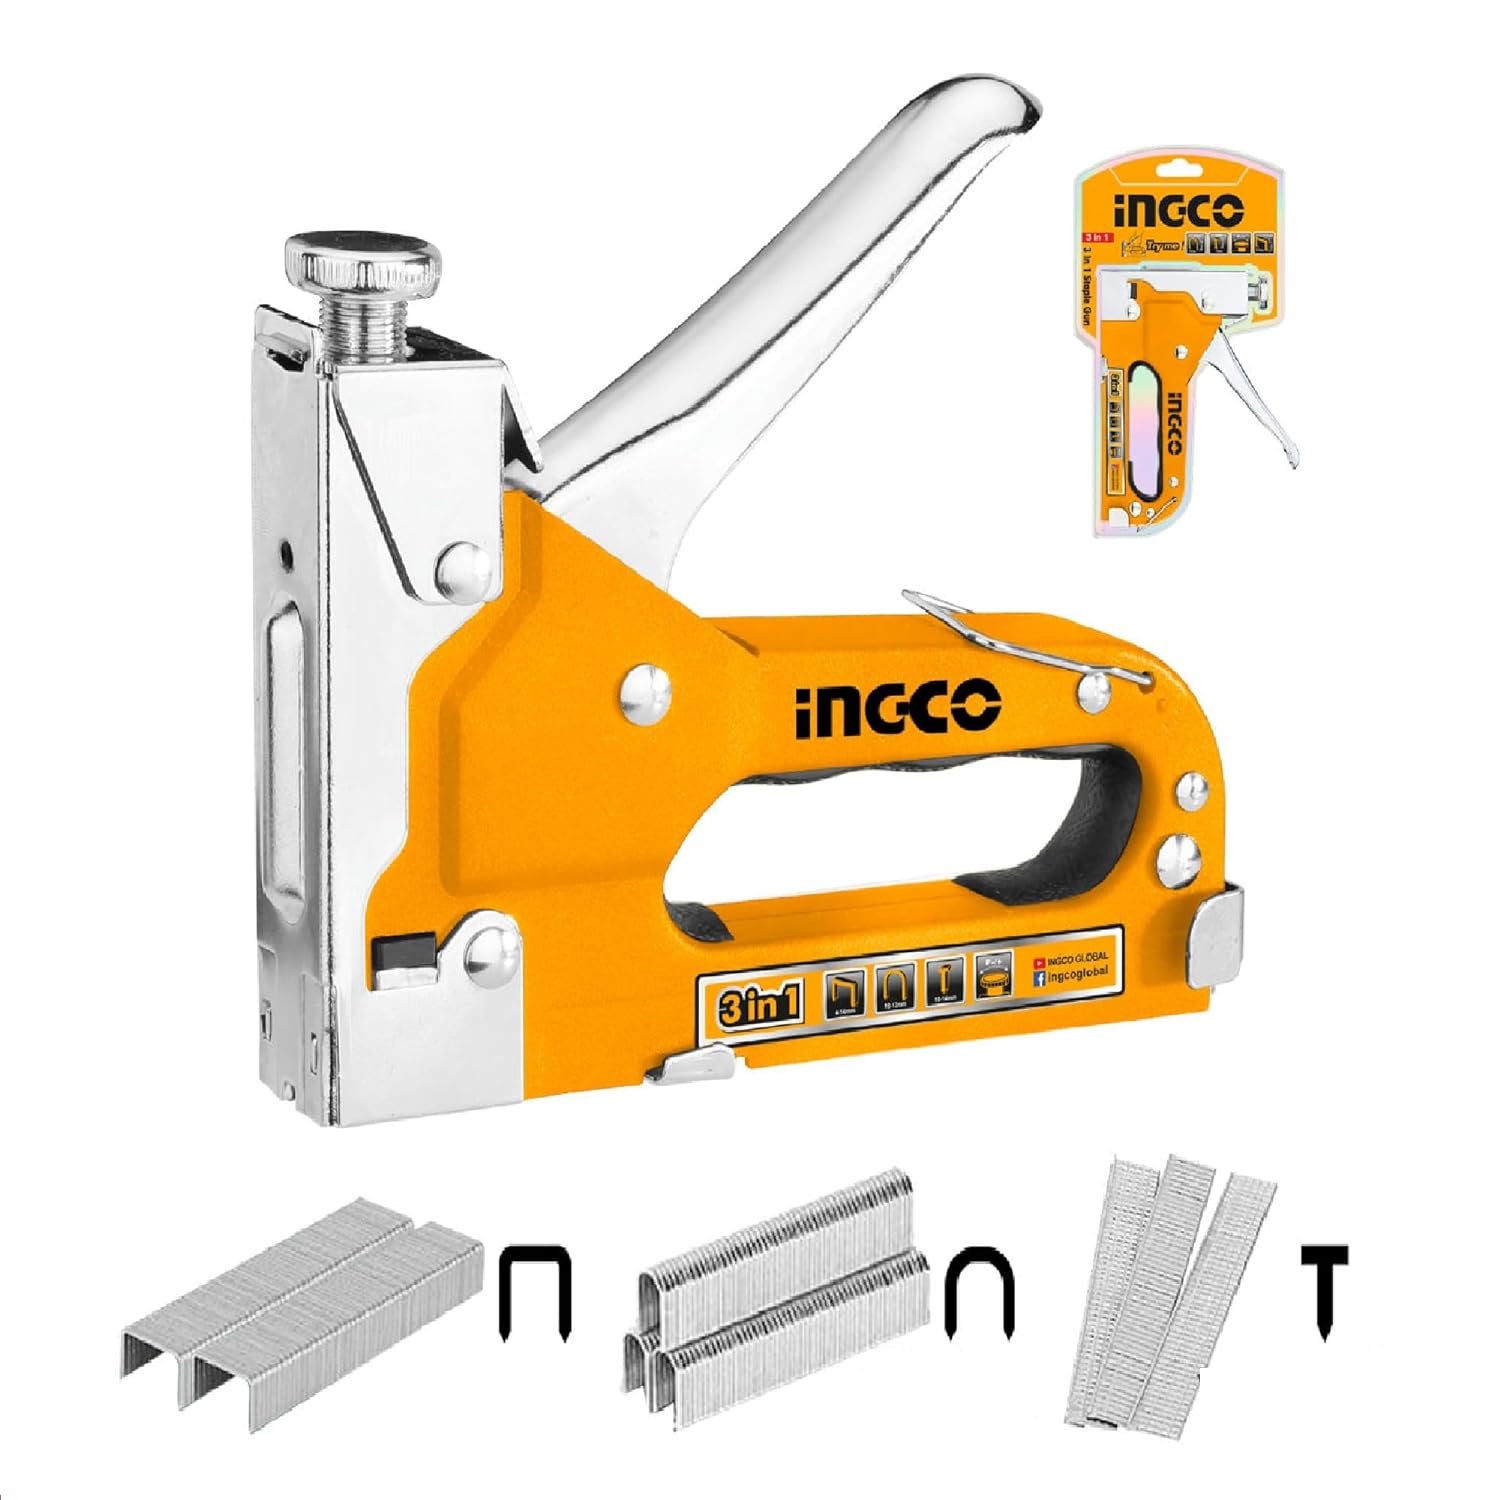 INGCO 3 in 1 Stapler with Staples Pins